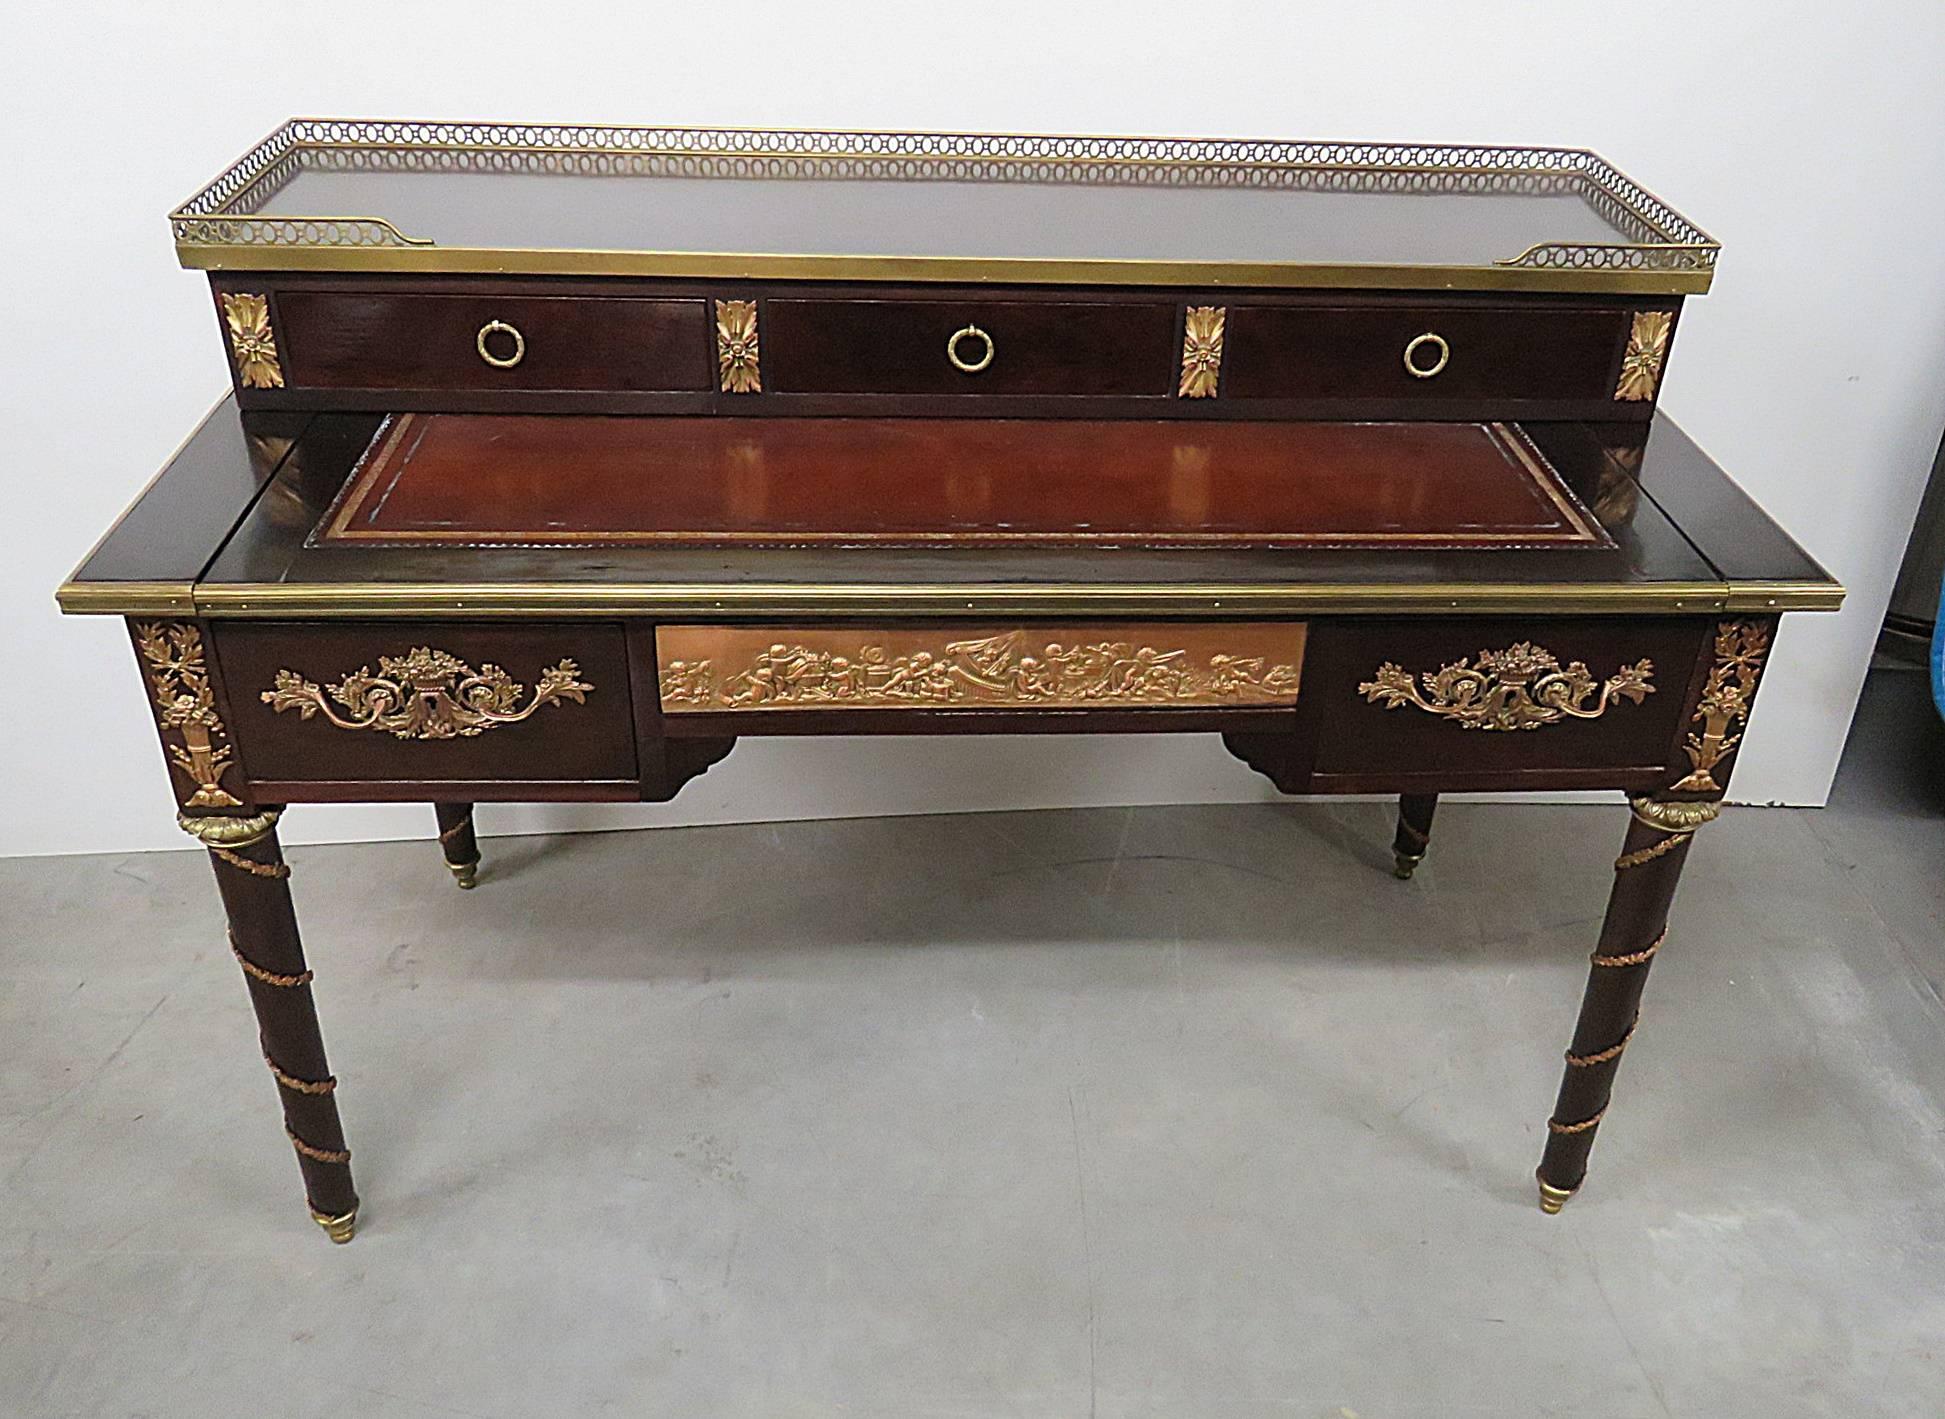 French Empire style desk with five drawers, brass gallery and decor. Measures: 28